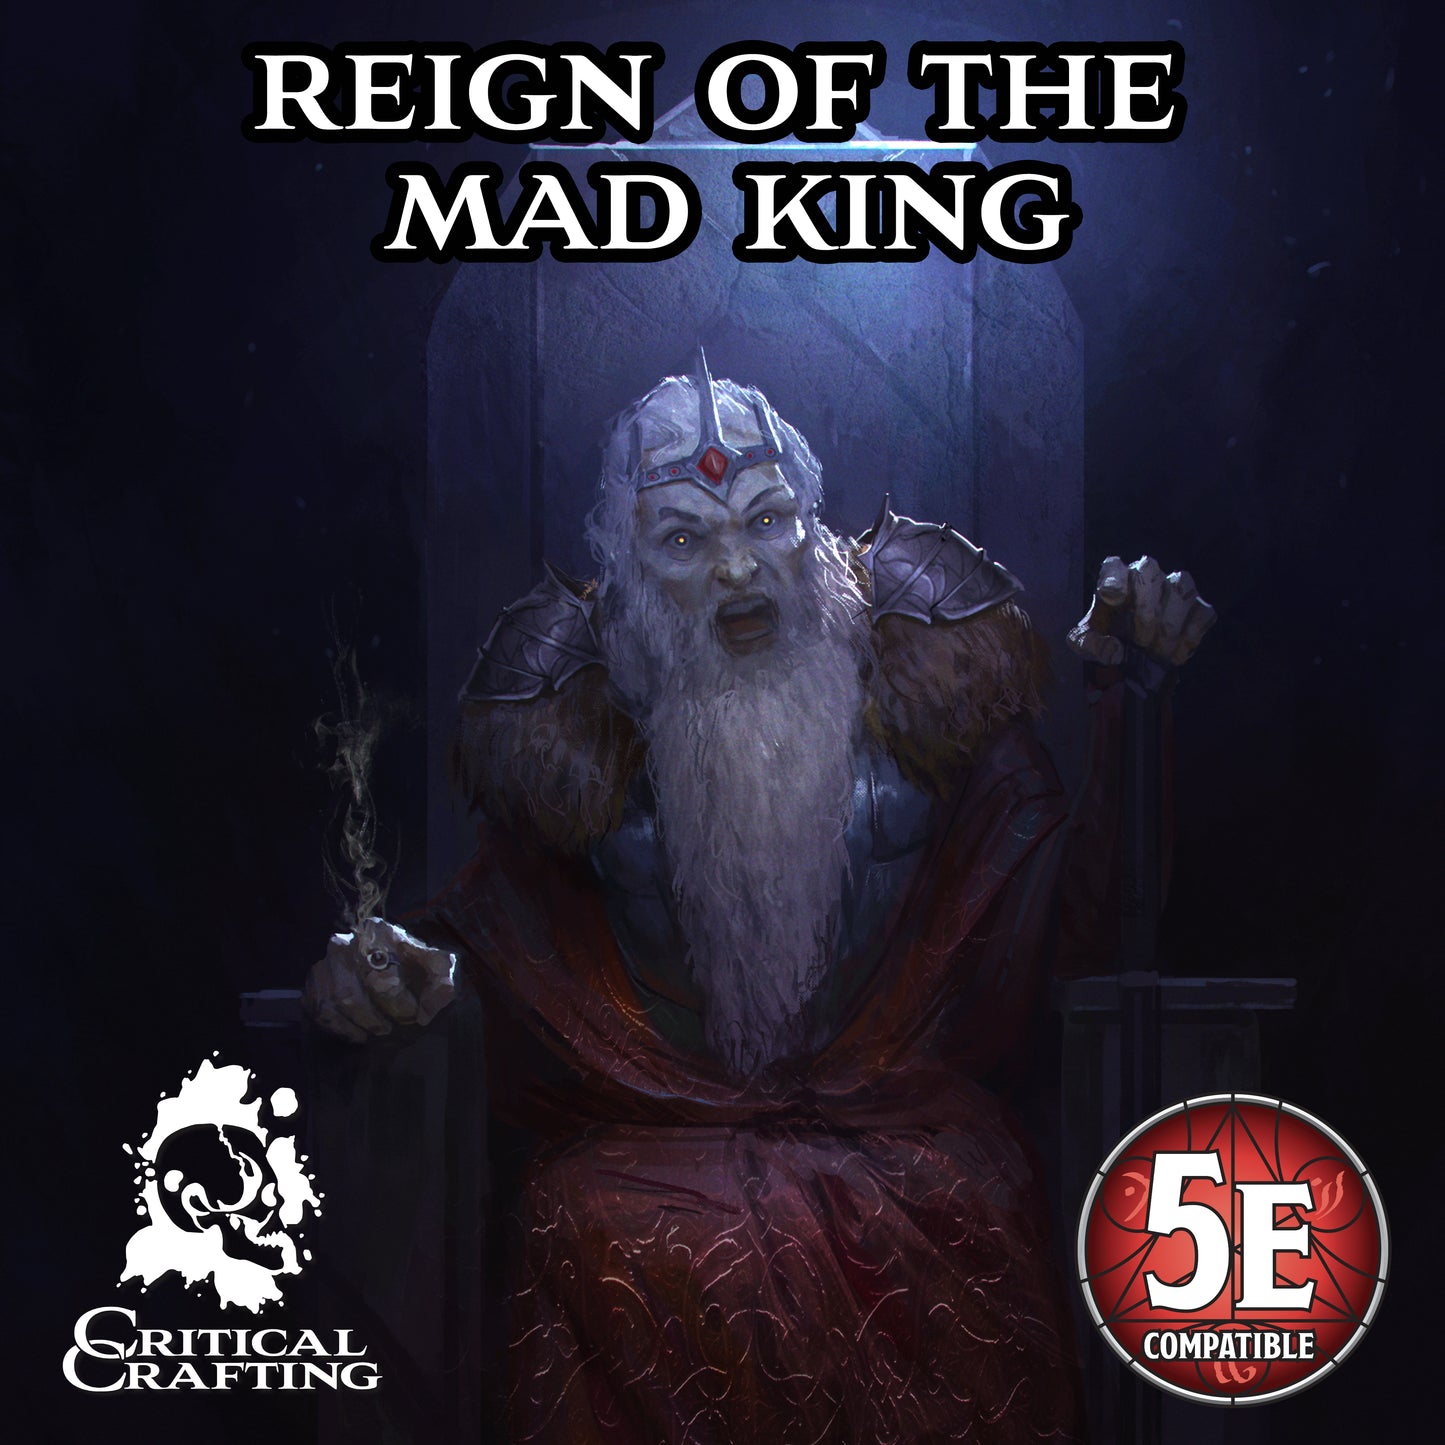 Reign of the Mad King PDF